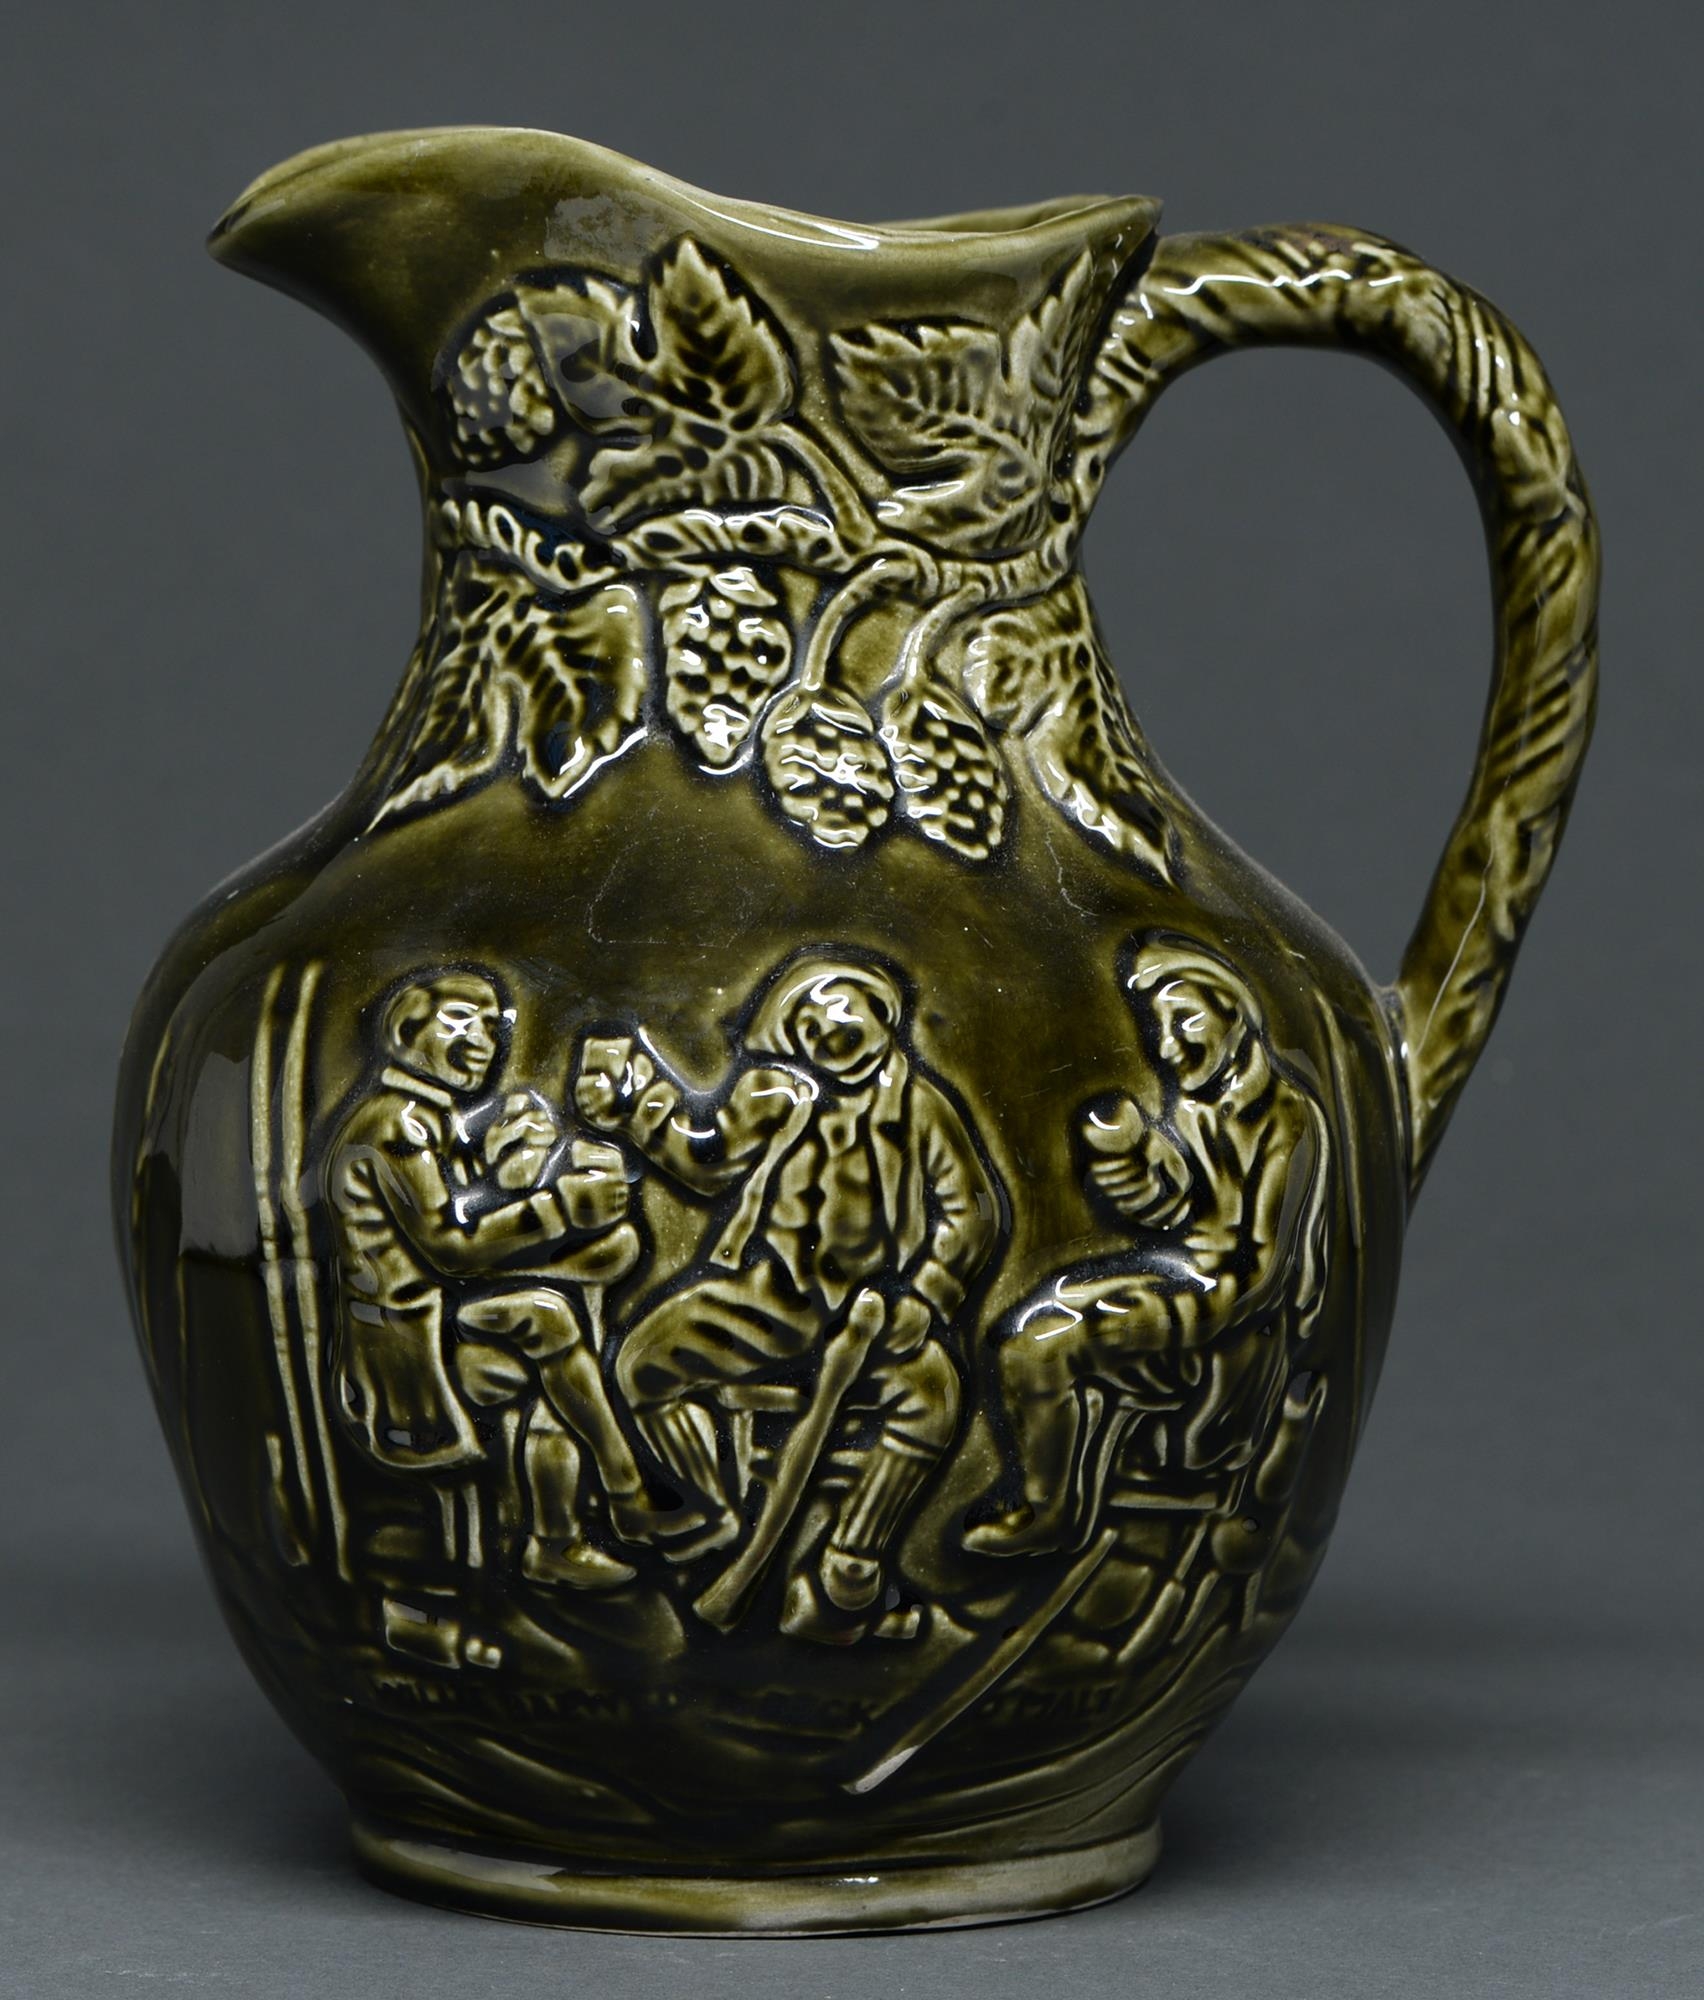 A Staffordshire olive green glazed moulded earthenware jug, late 19th c, with tavern scene, 22.5cm h